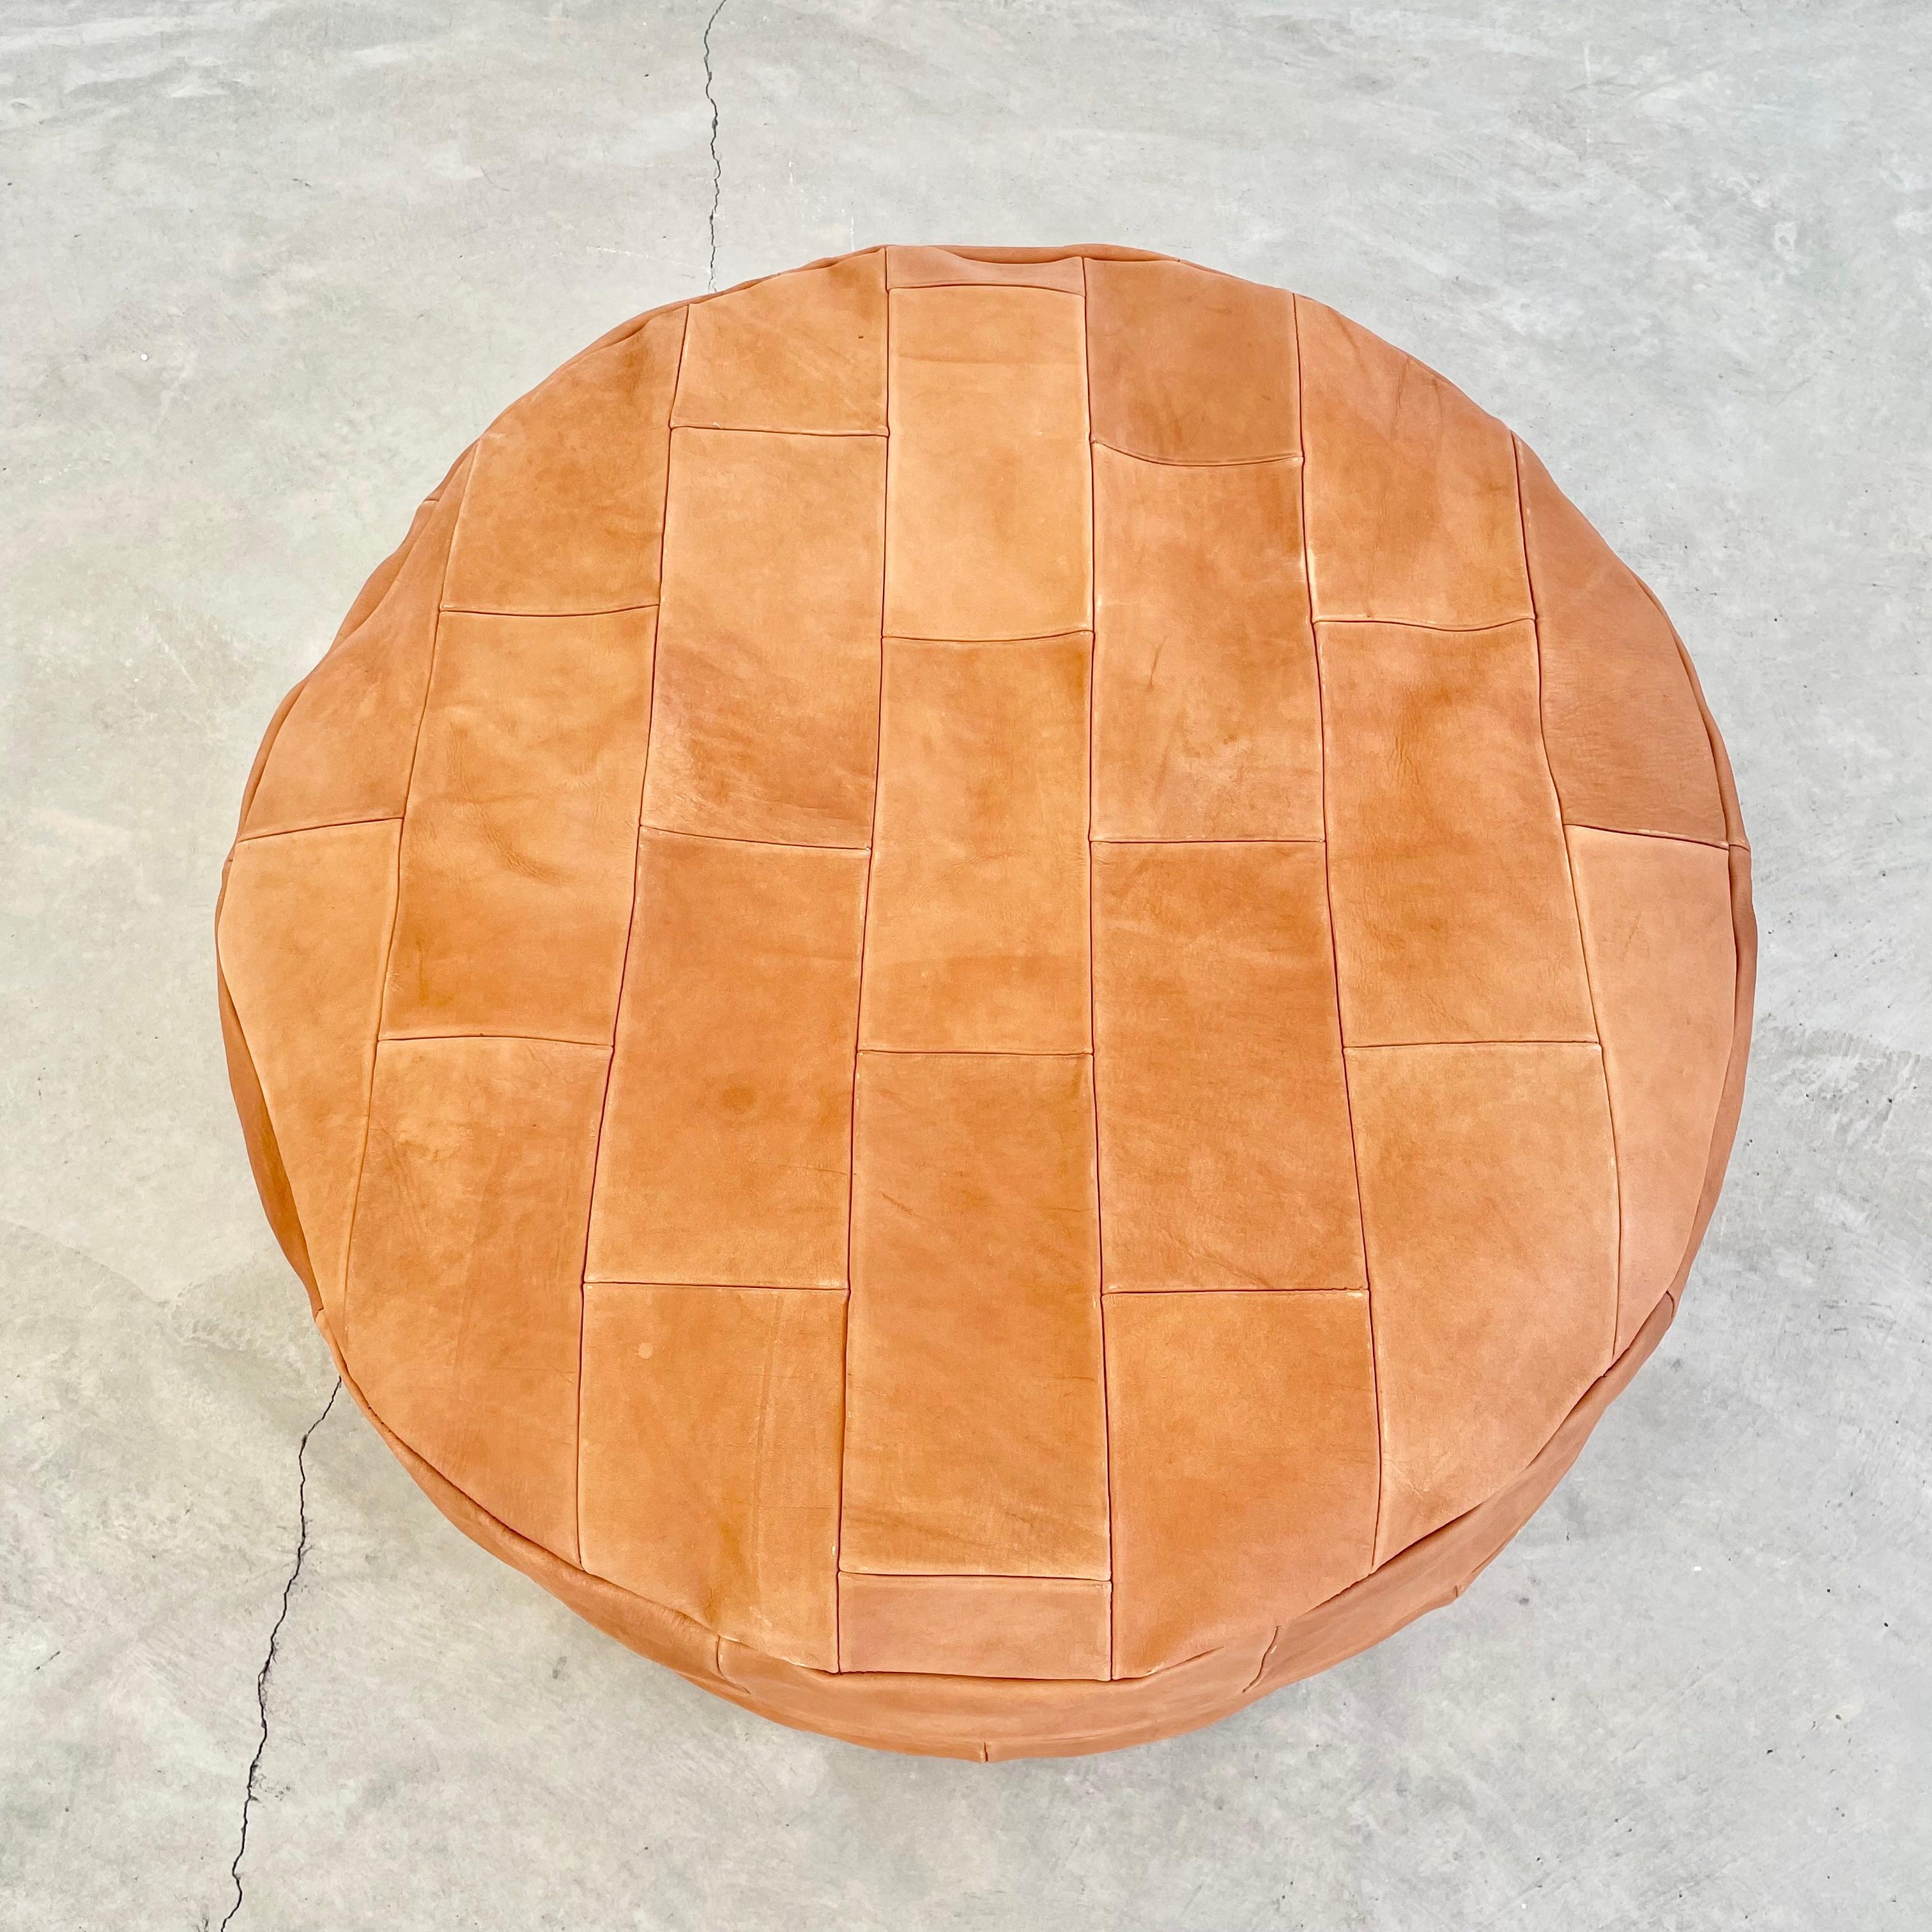 Gorgeous new production brown leather pouf from Morocco. Square patchwork design in a thick saddle cowhide. Larger size making it perfect as a foot rest and comfortable seat as well. Handmade with extreme attention to detail, these leather poufs